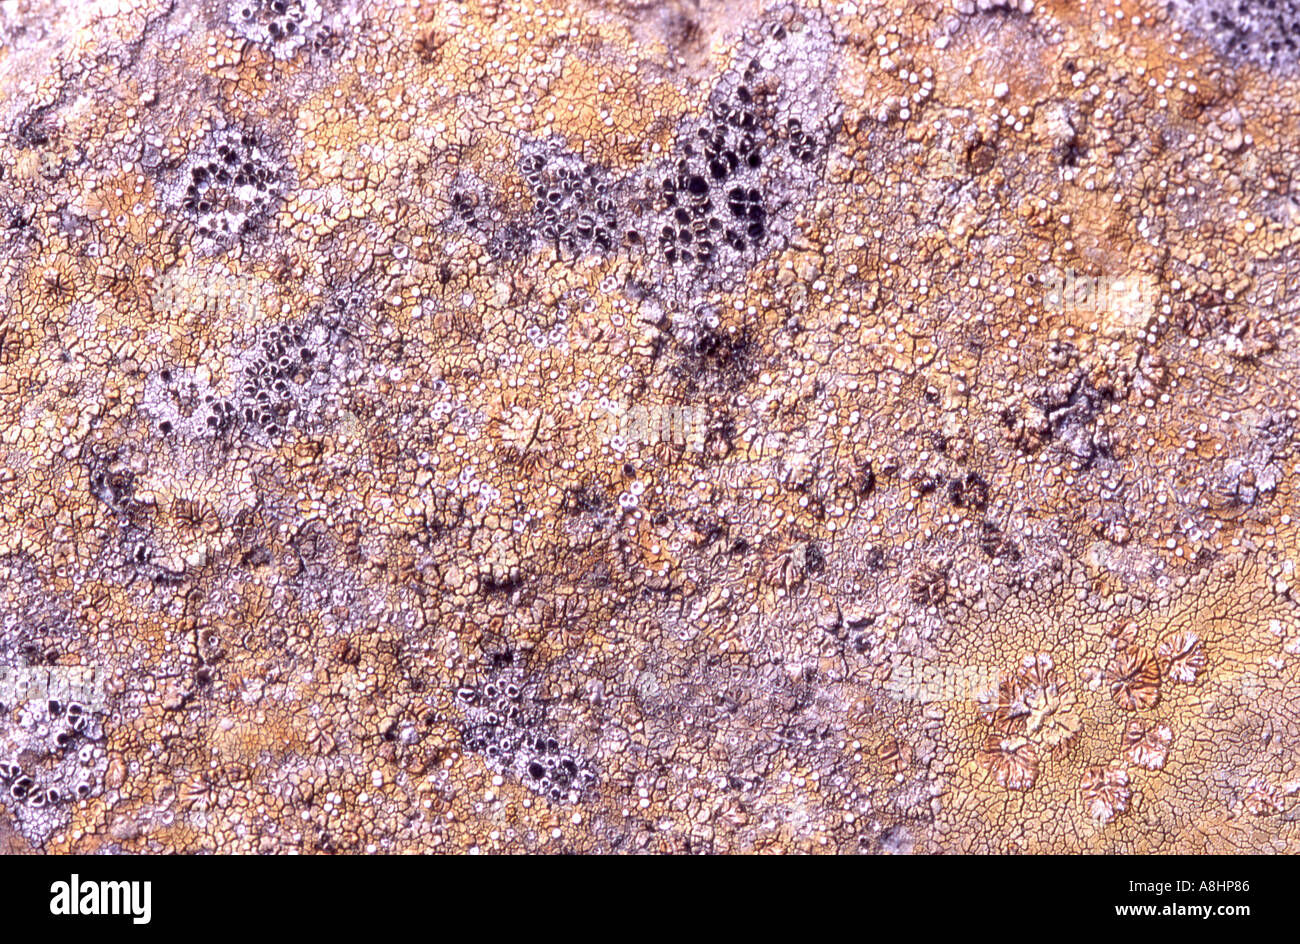 Abstract detail of various and colourful lichens on rocks rocky surface Stock Photo